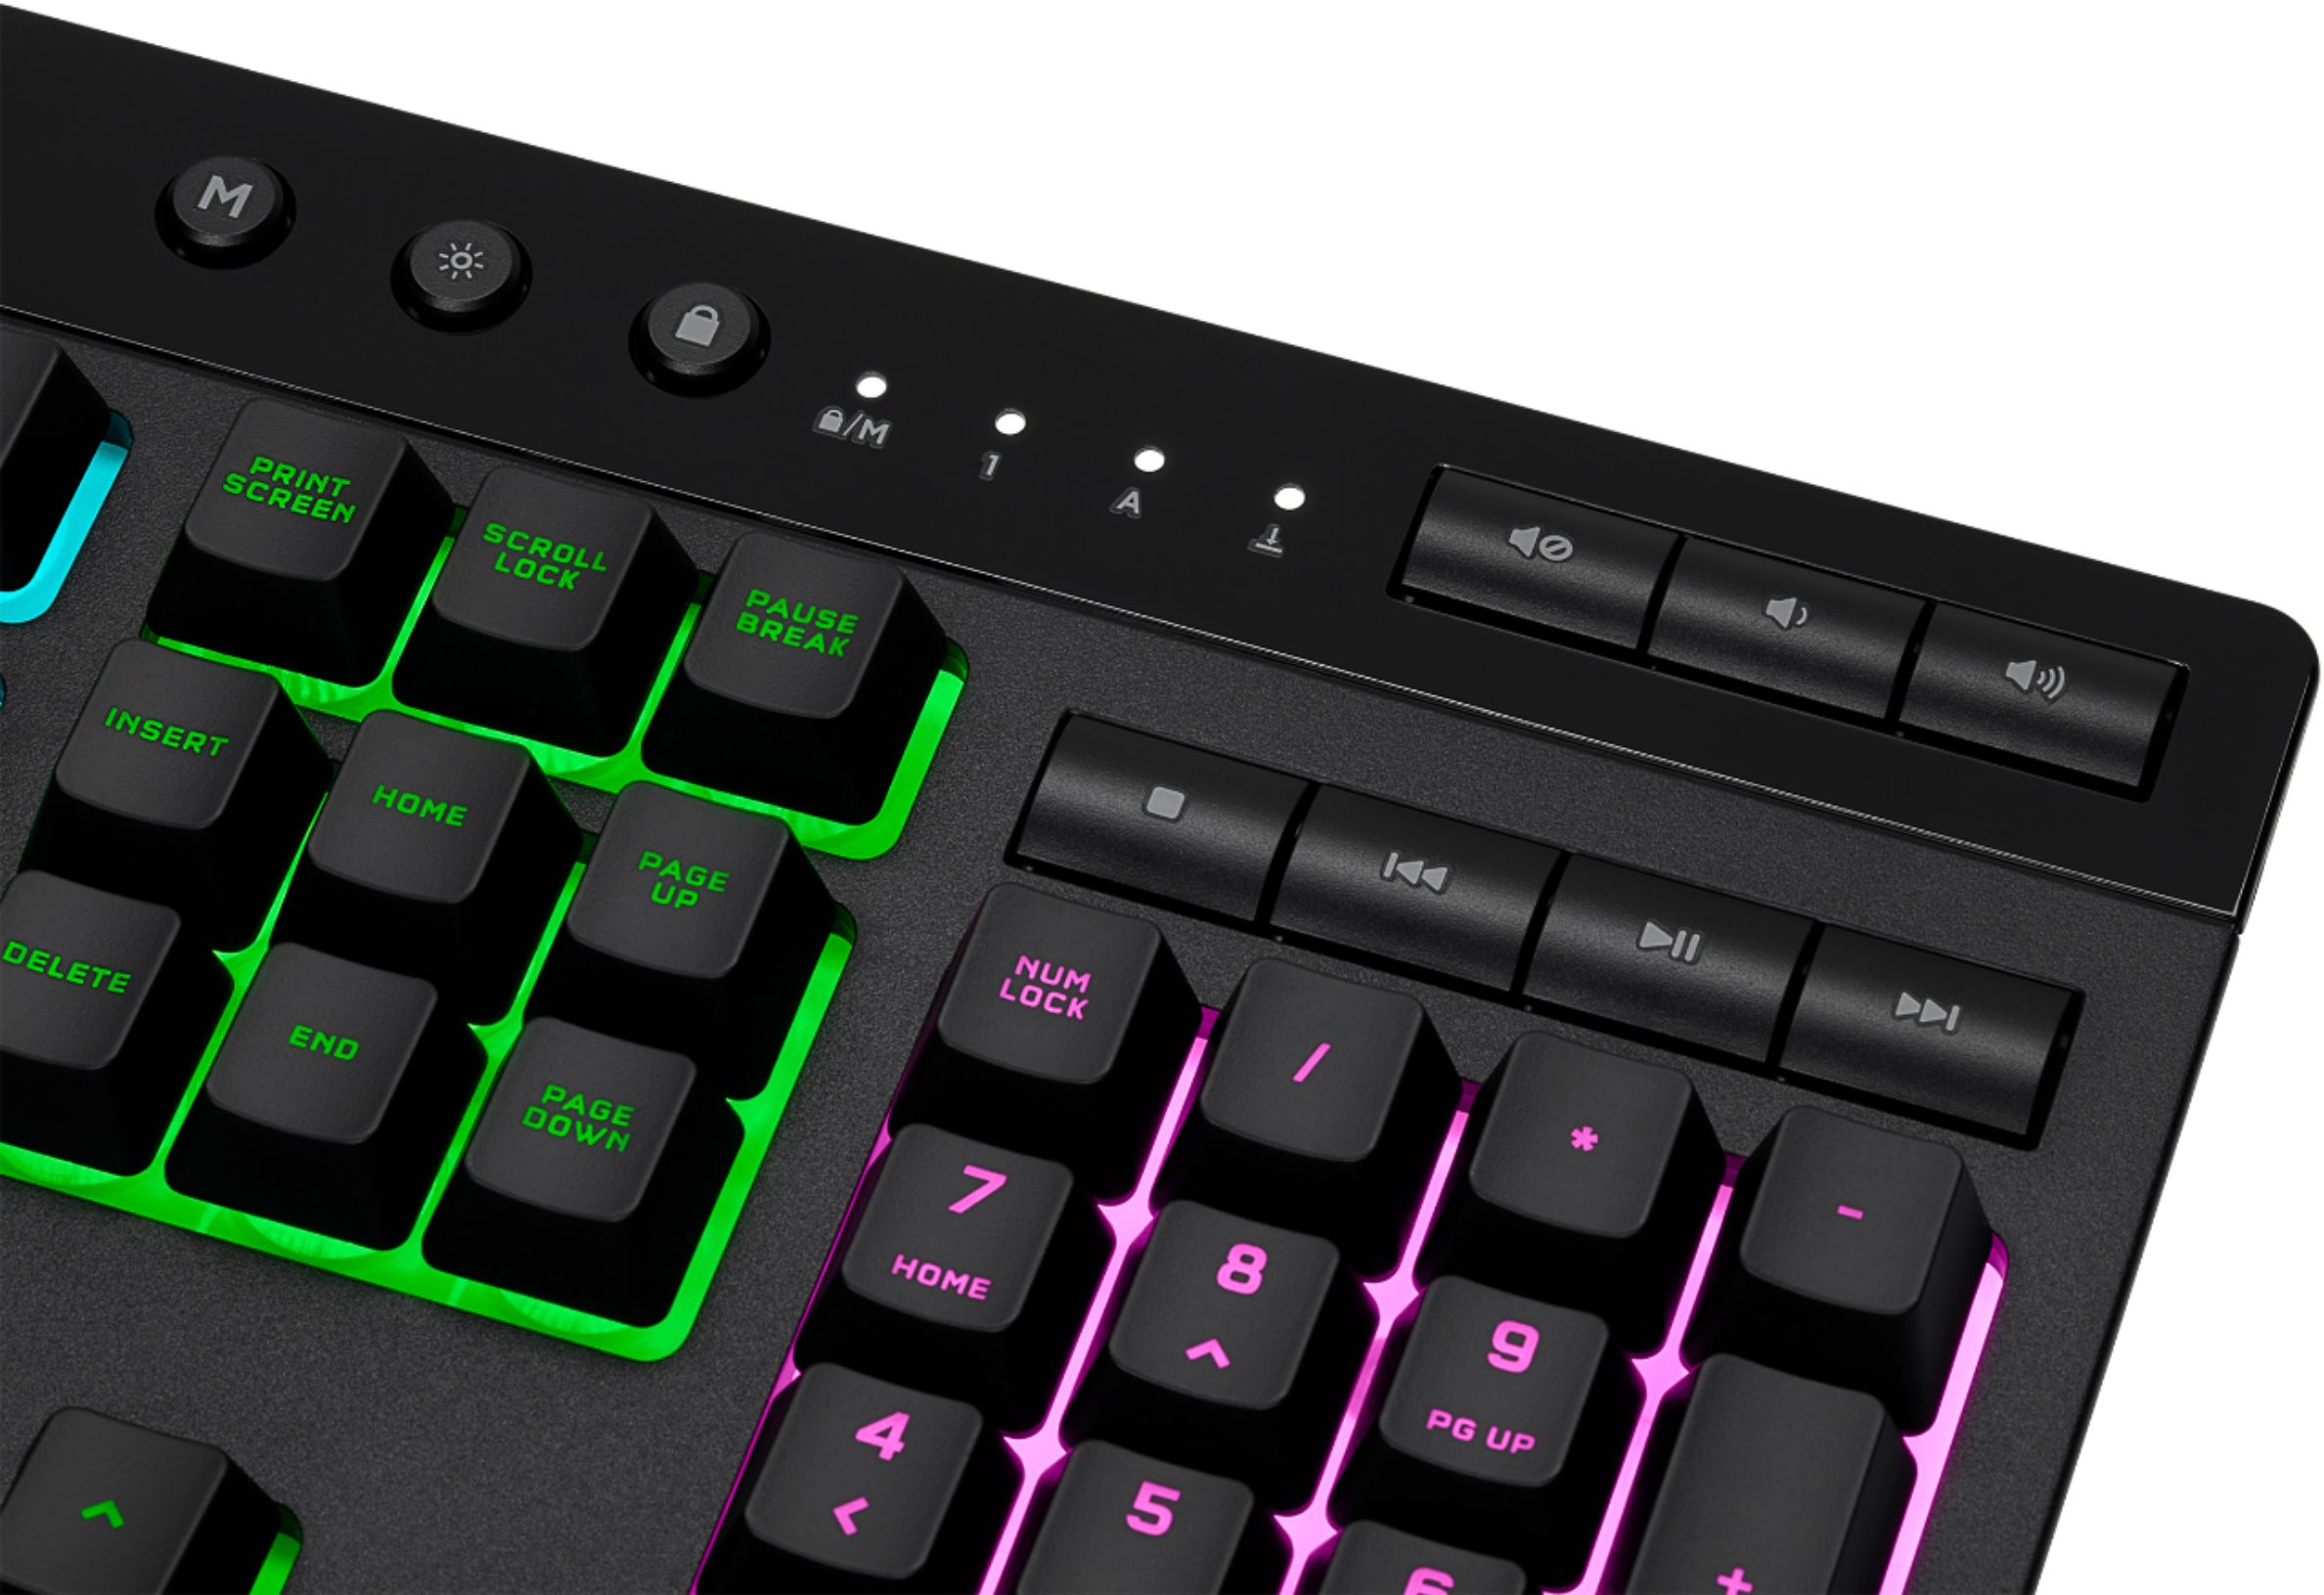 CORSAIR K55 RGB Pro Full-size Wired Dome Membrane Gaming Keyboard with  Elgato Stream Deck Software Integration Black CH-9226765-NA - Best Buy